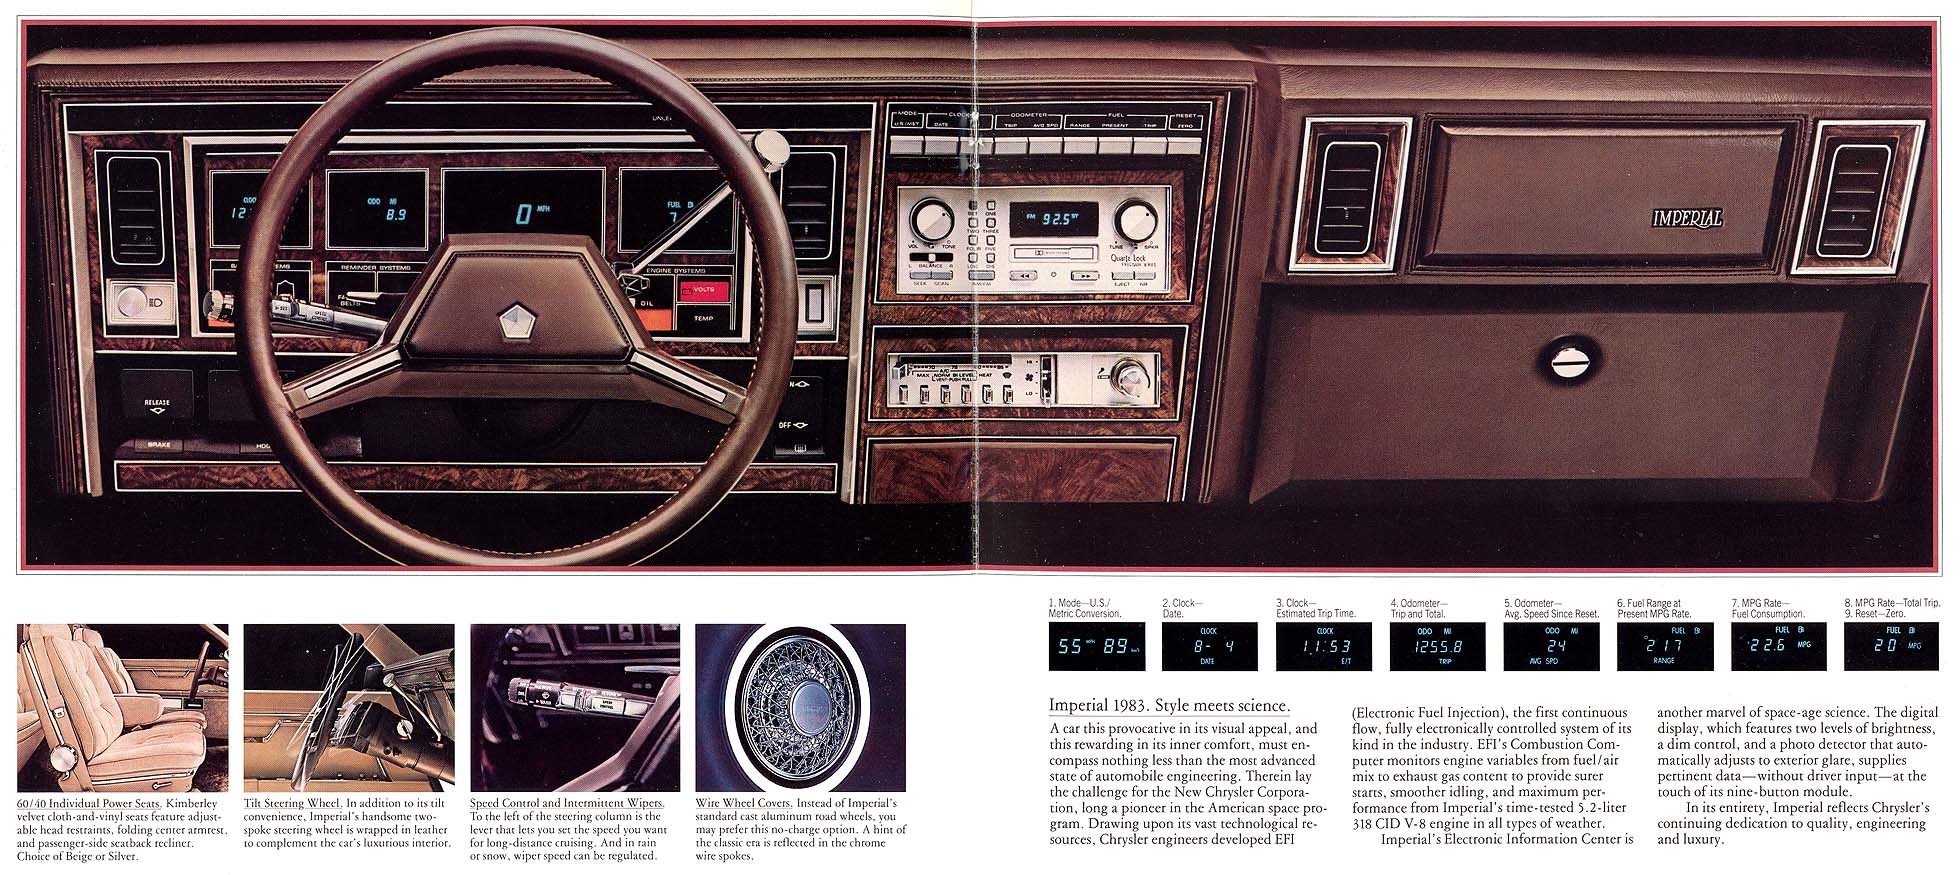 1983 Chrysler Imperial Brochure Page 6